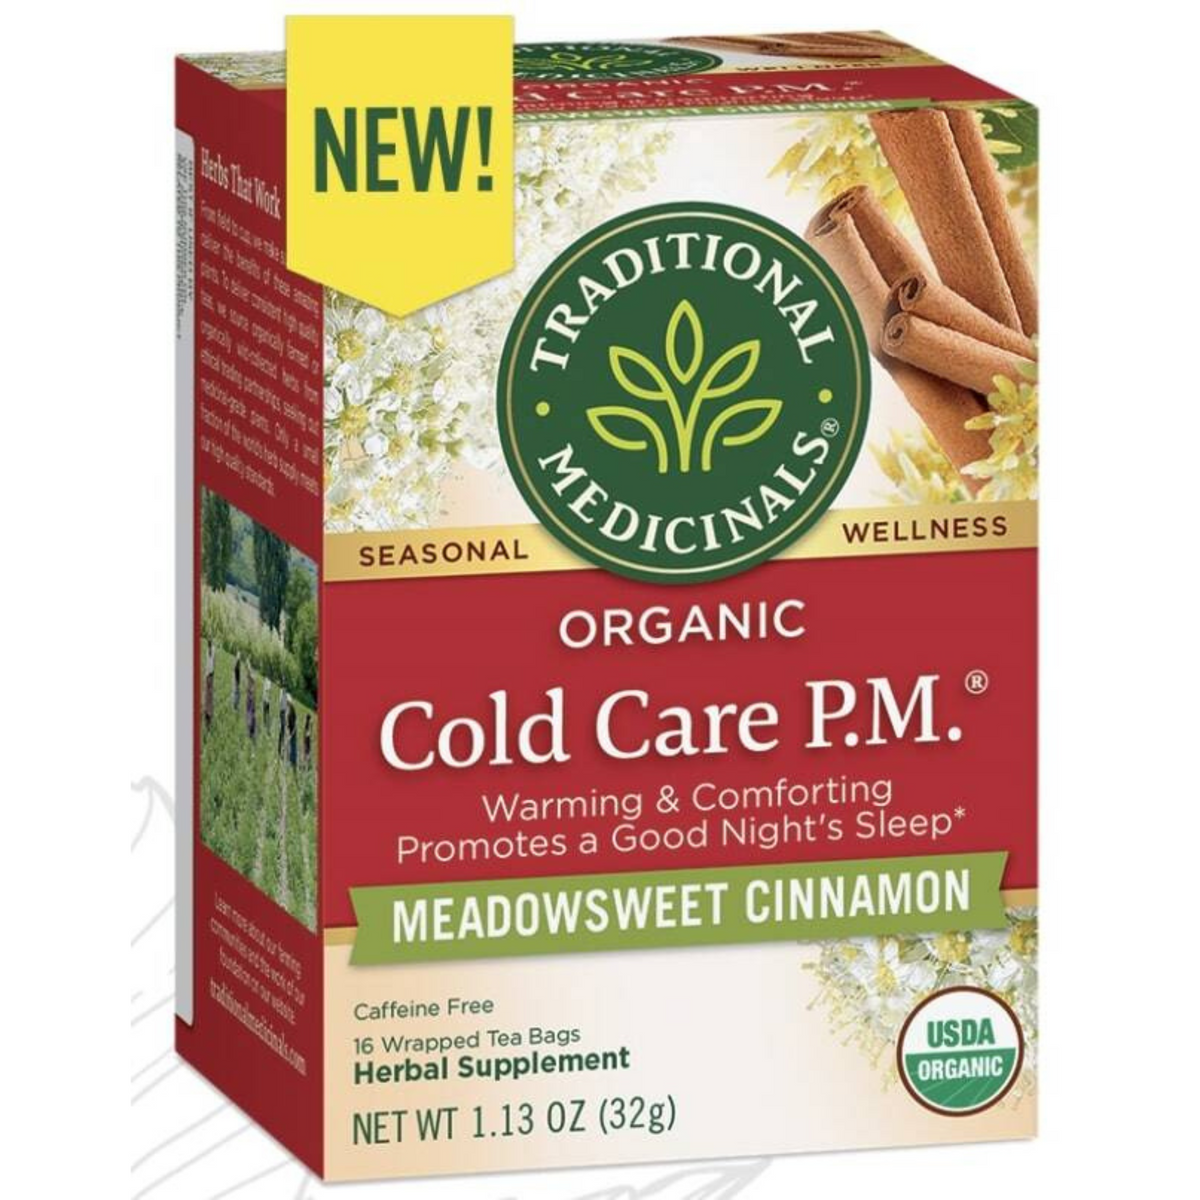 Primary Image of Cold Care P.M. Tea Bags